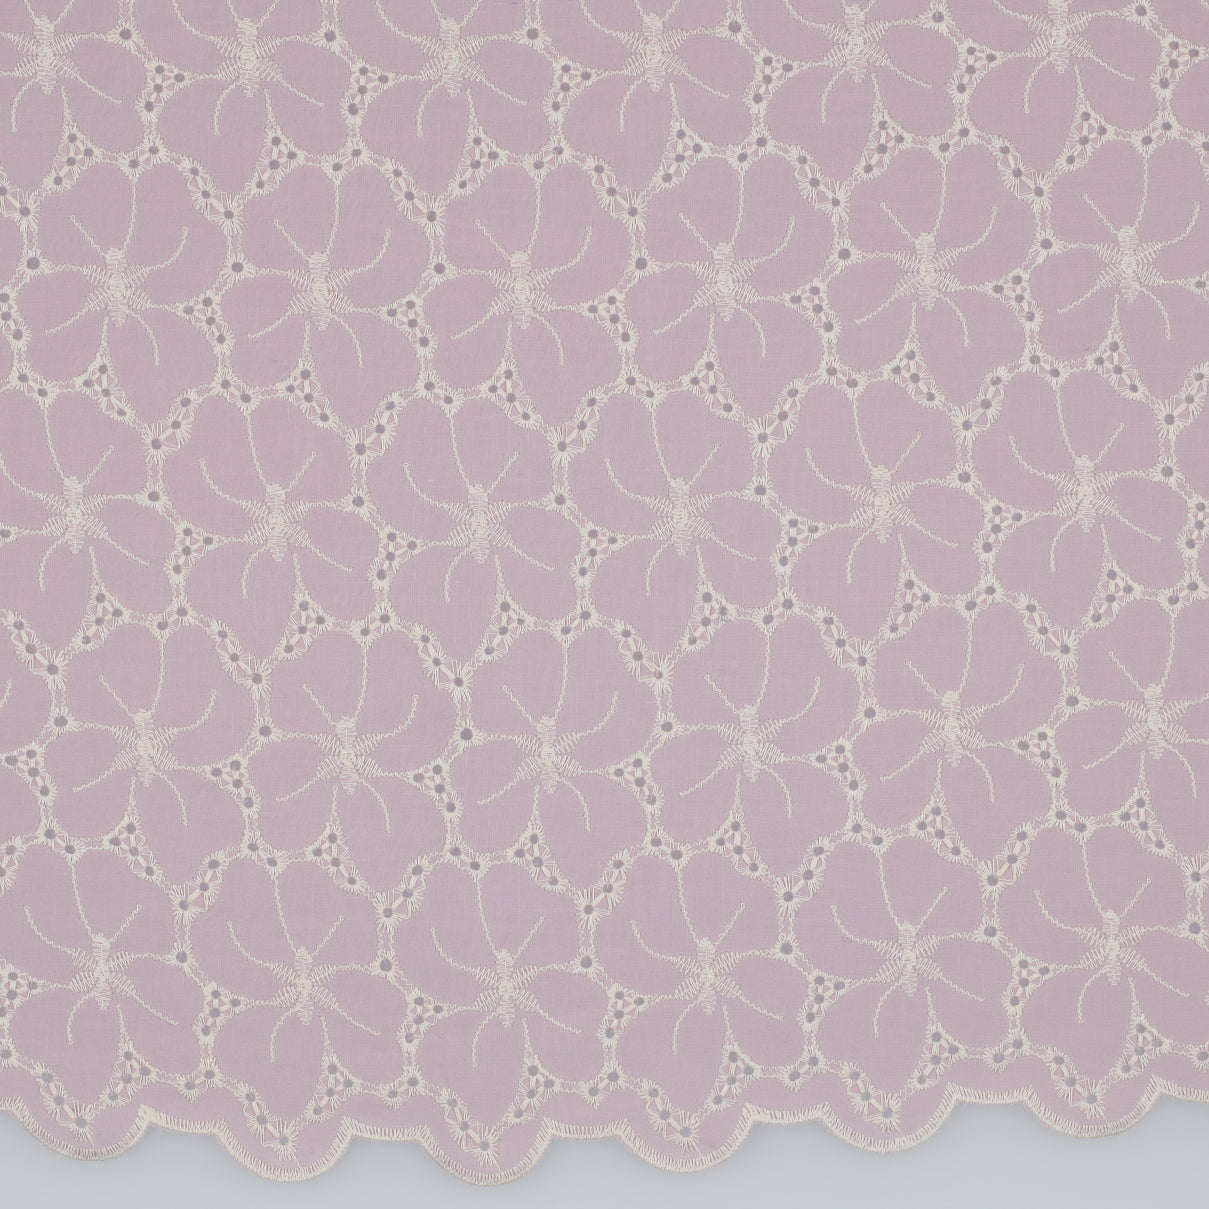 Scalloped Flowers Border Embroidered Cotton Fabric in Cherry Blossom